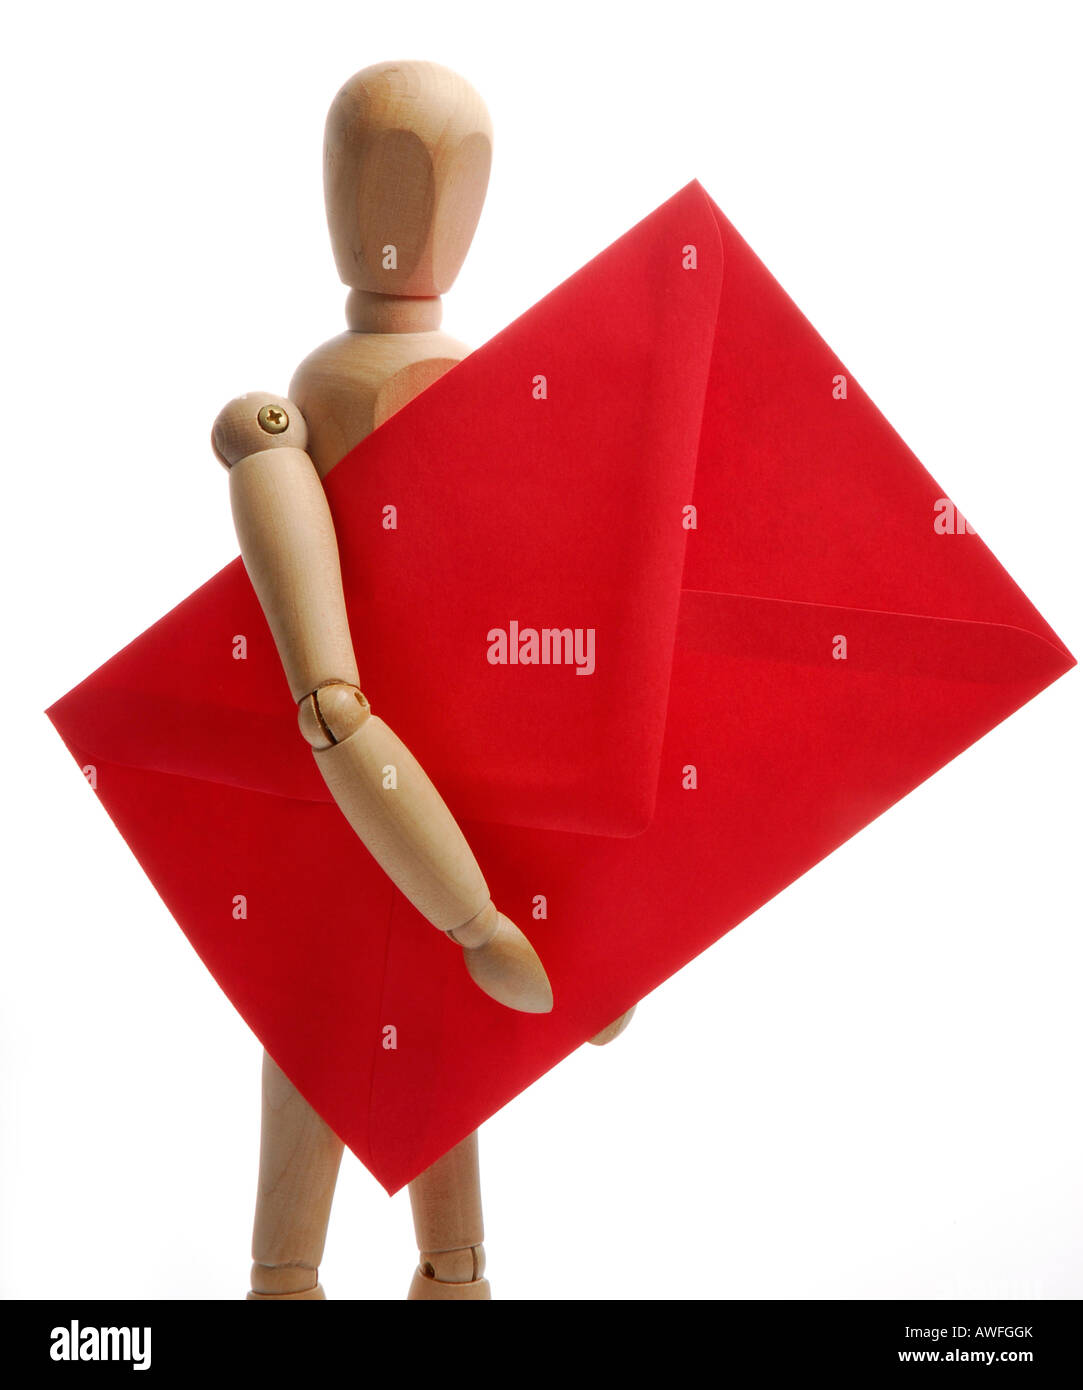 Jointed mannequin holding a red envelope Stock Photo